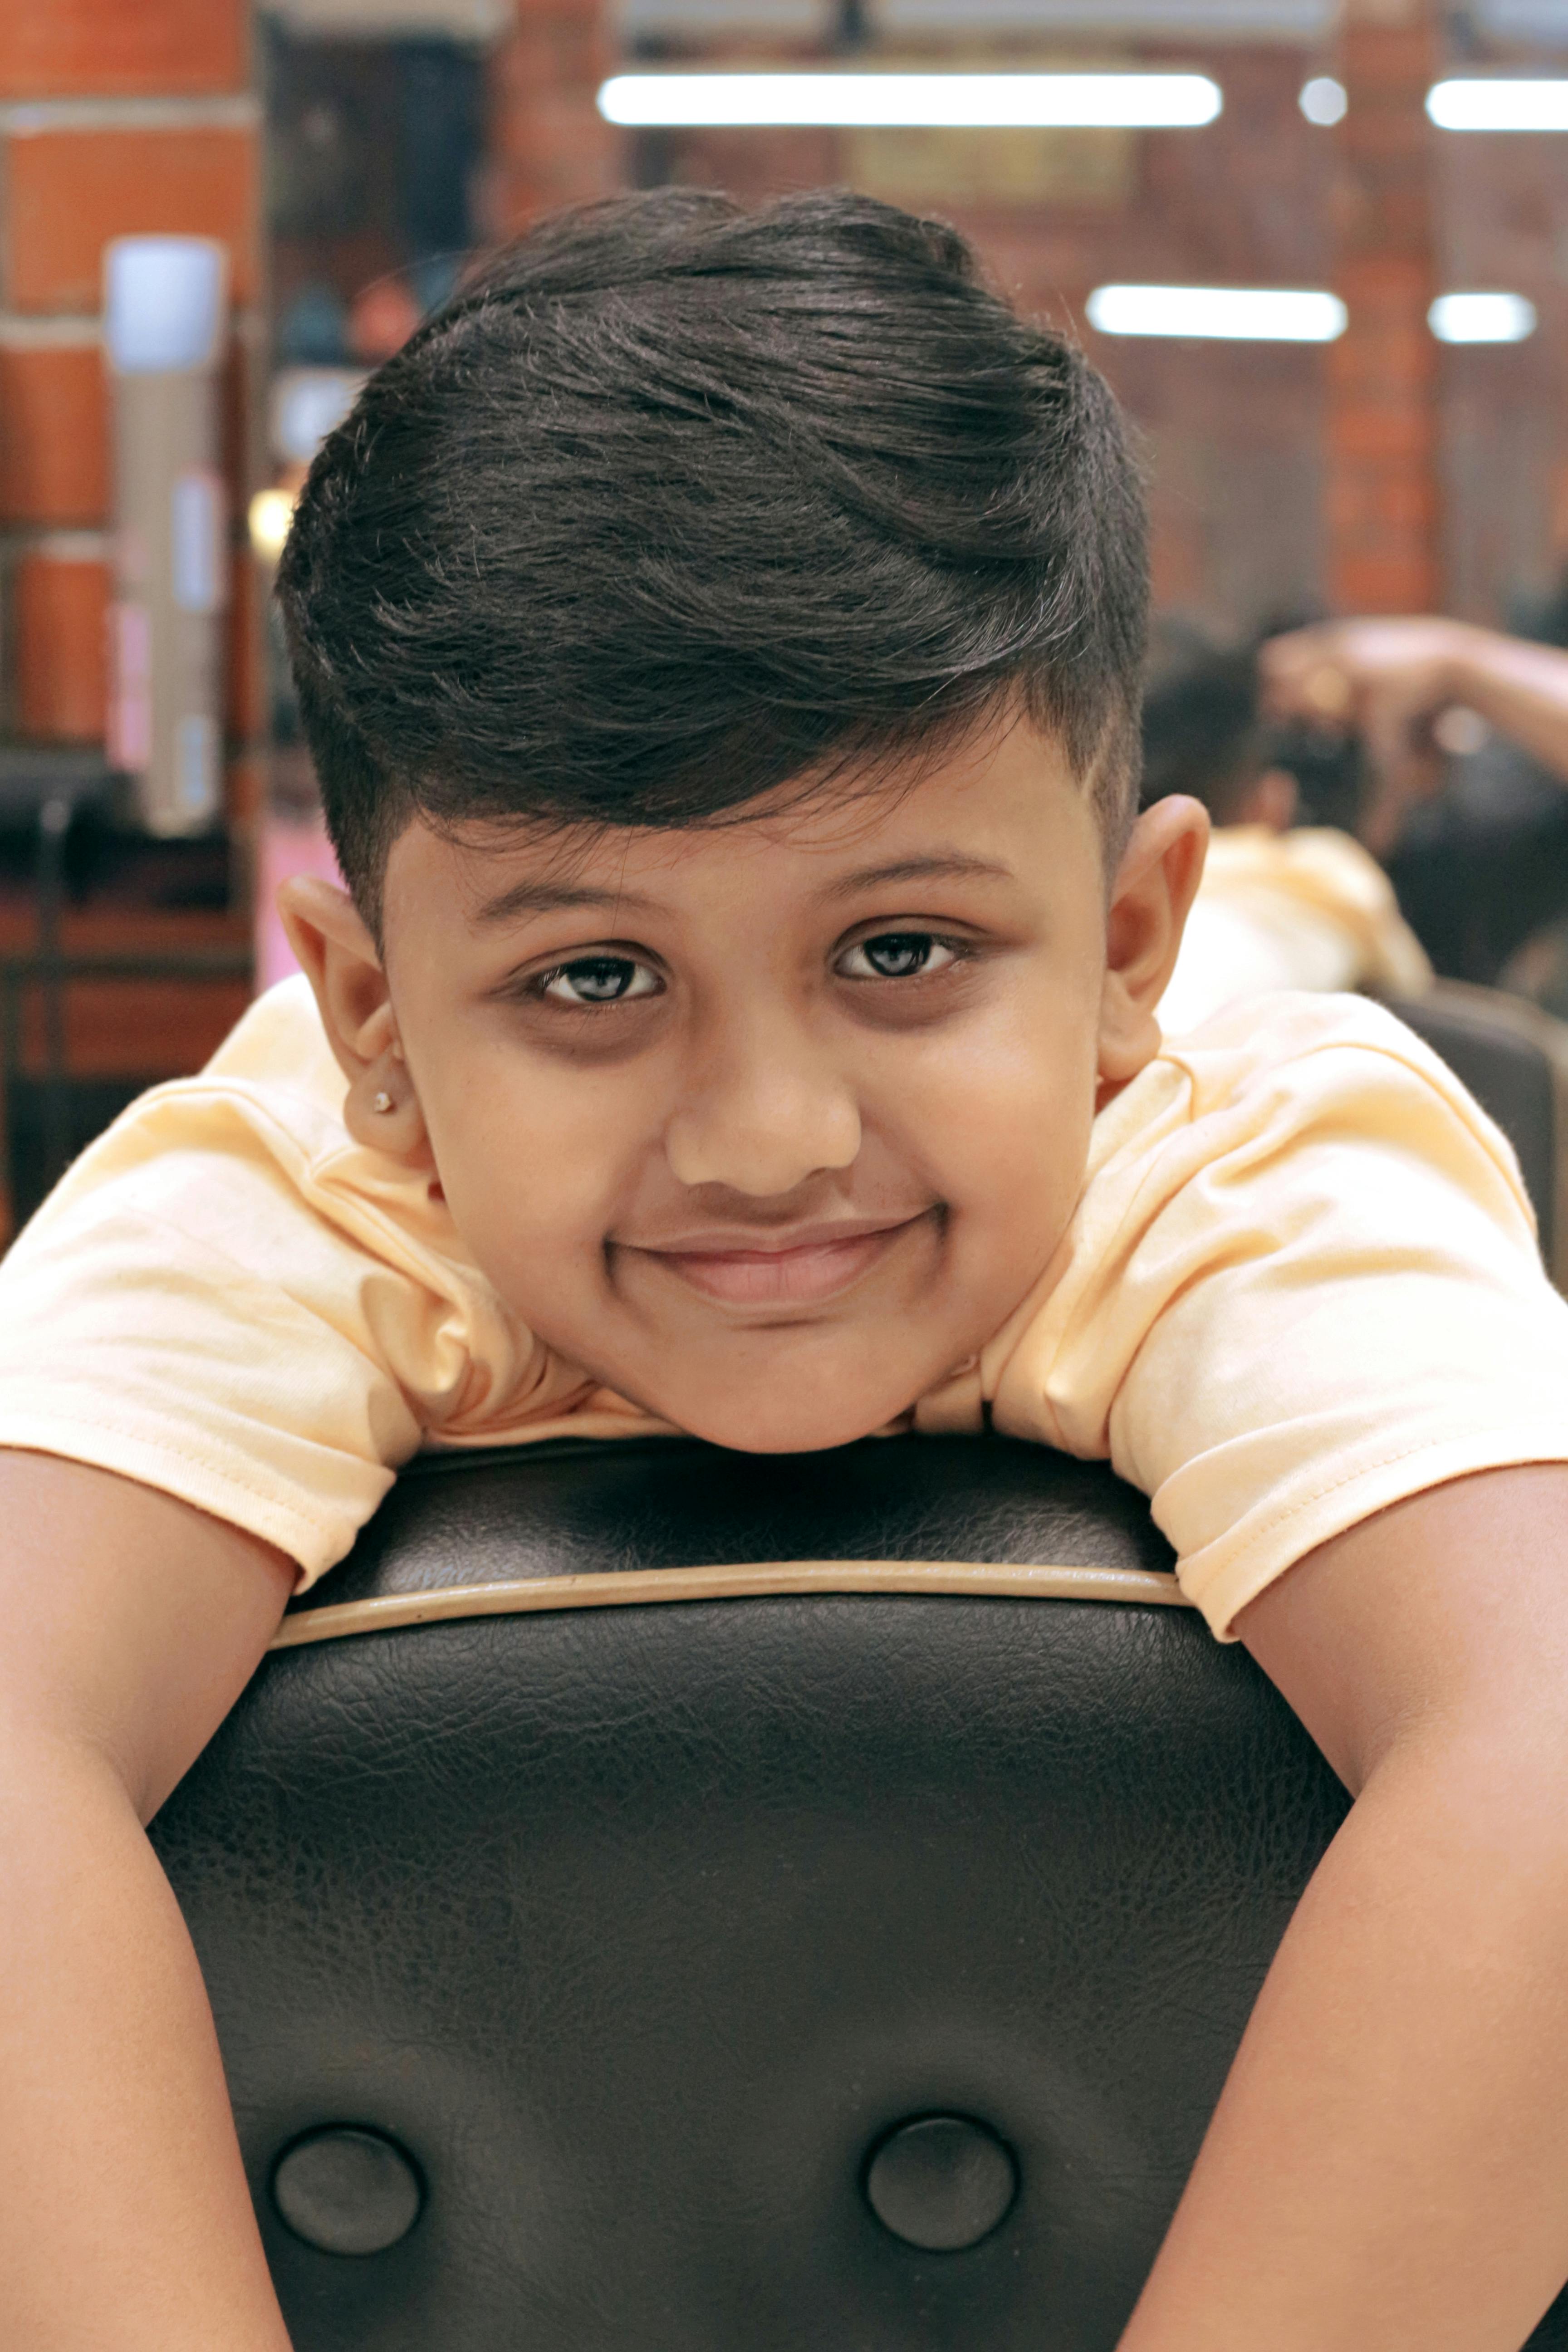 new hairstyle 2019 boy Indian | hairstyle boy Indian 2019 | boys hairstyle  - YouTube